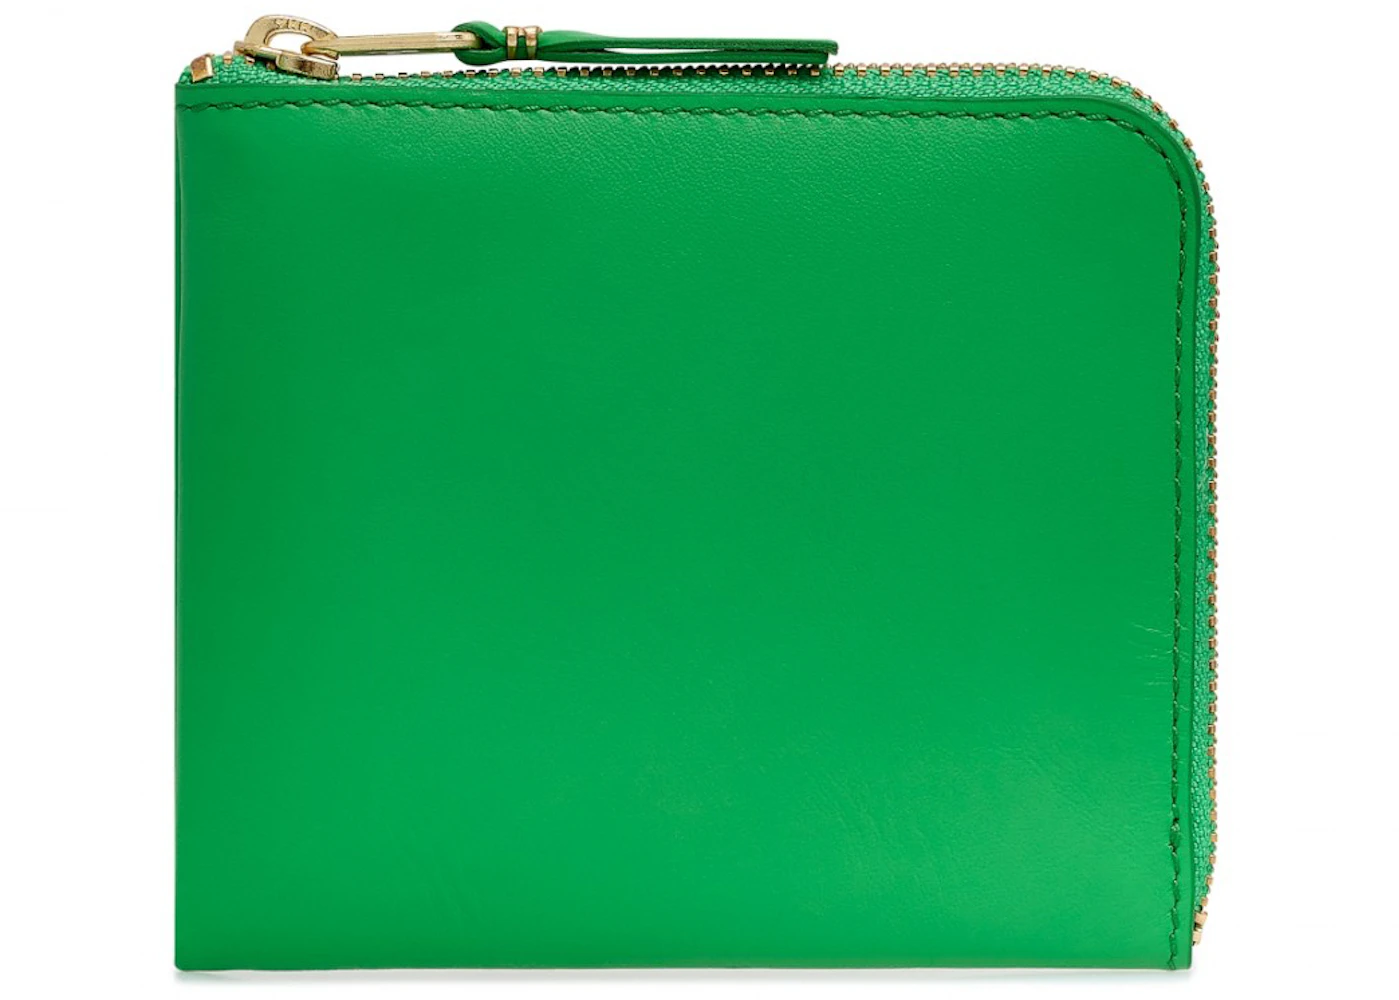 Comme des Garcons SA3100C Colour Plain Wallet Green in Leather with ...